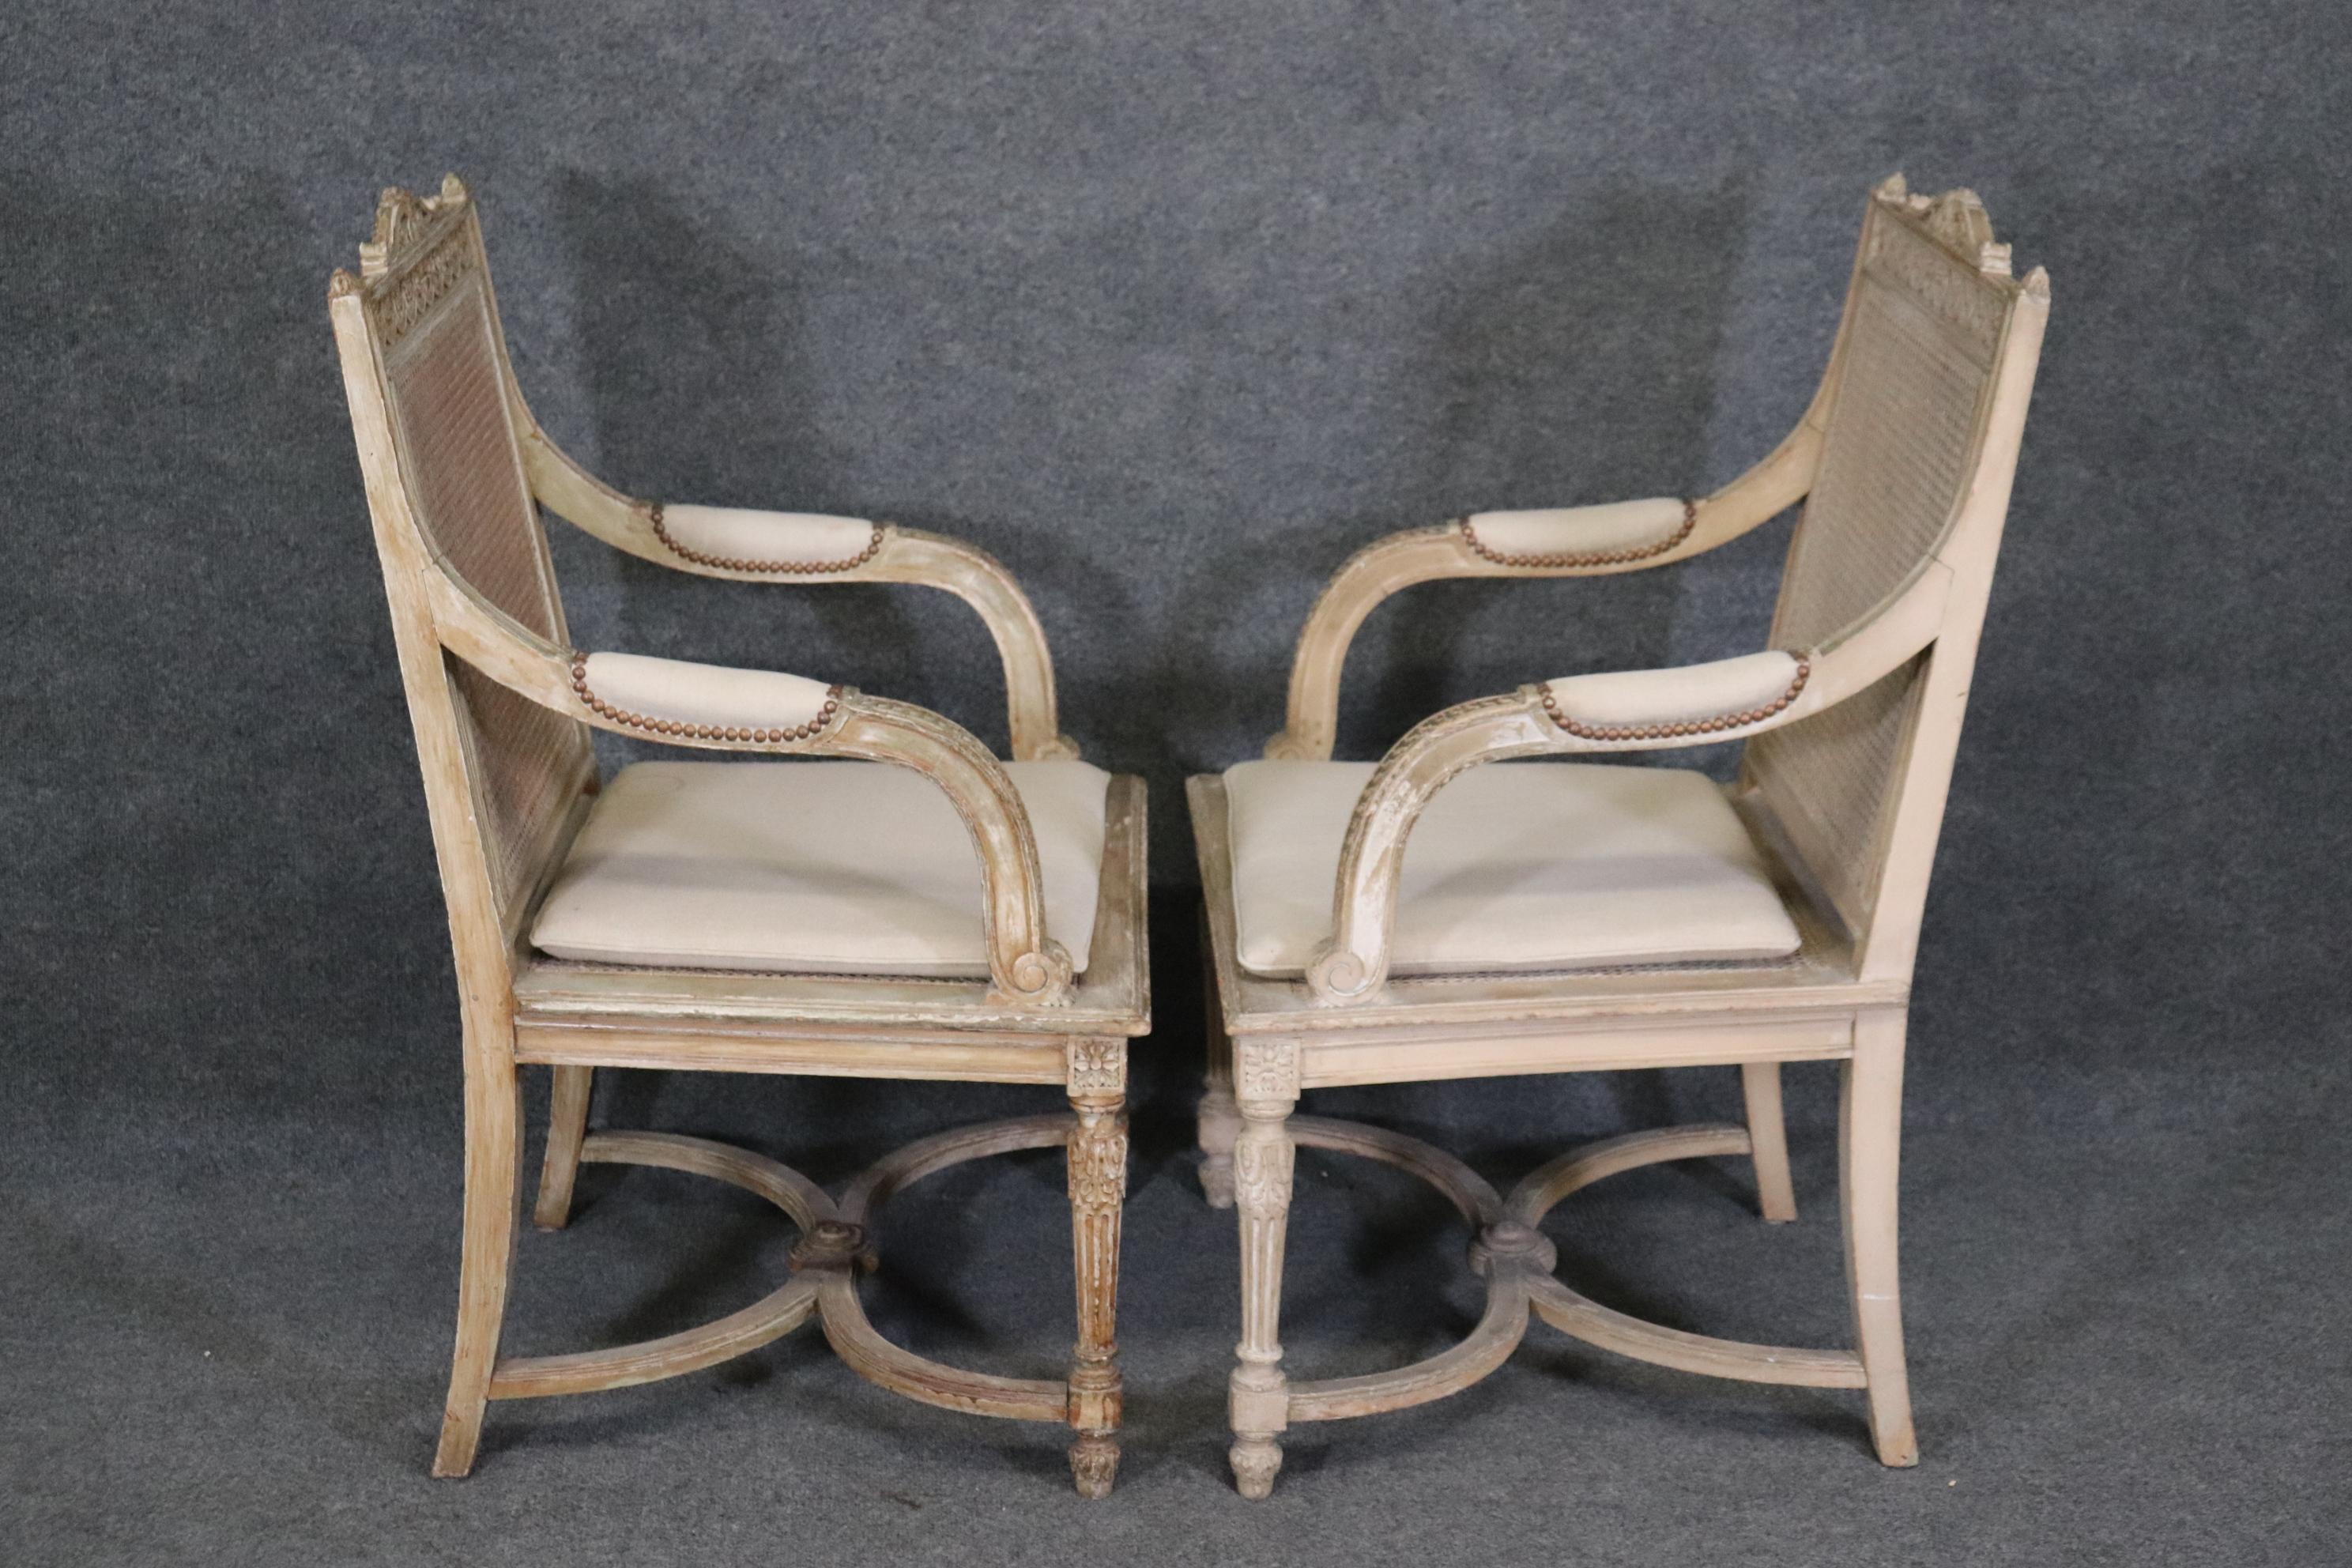   Pair of Cane Back Antique White Paint Decorated Louis XVI Style Armchairs Dini For Sale 1